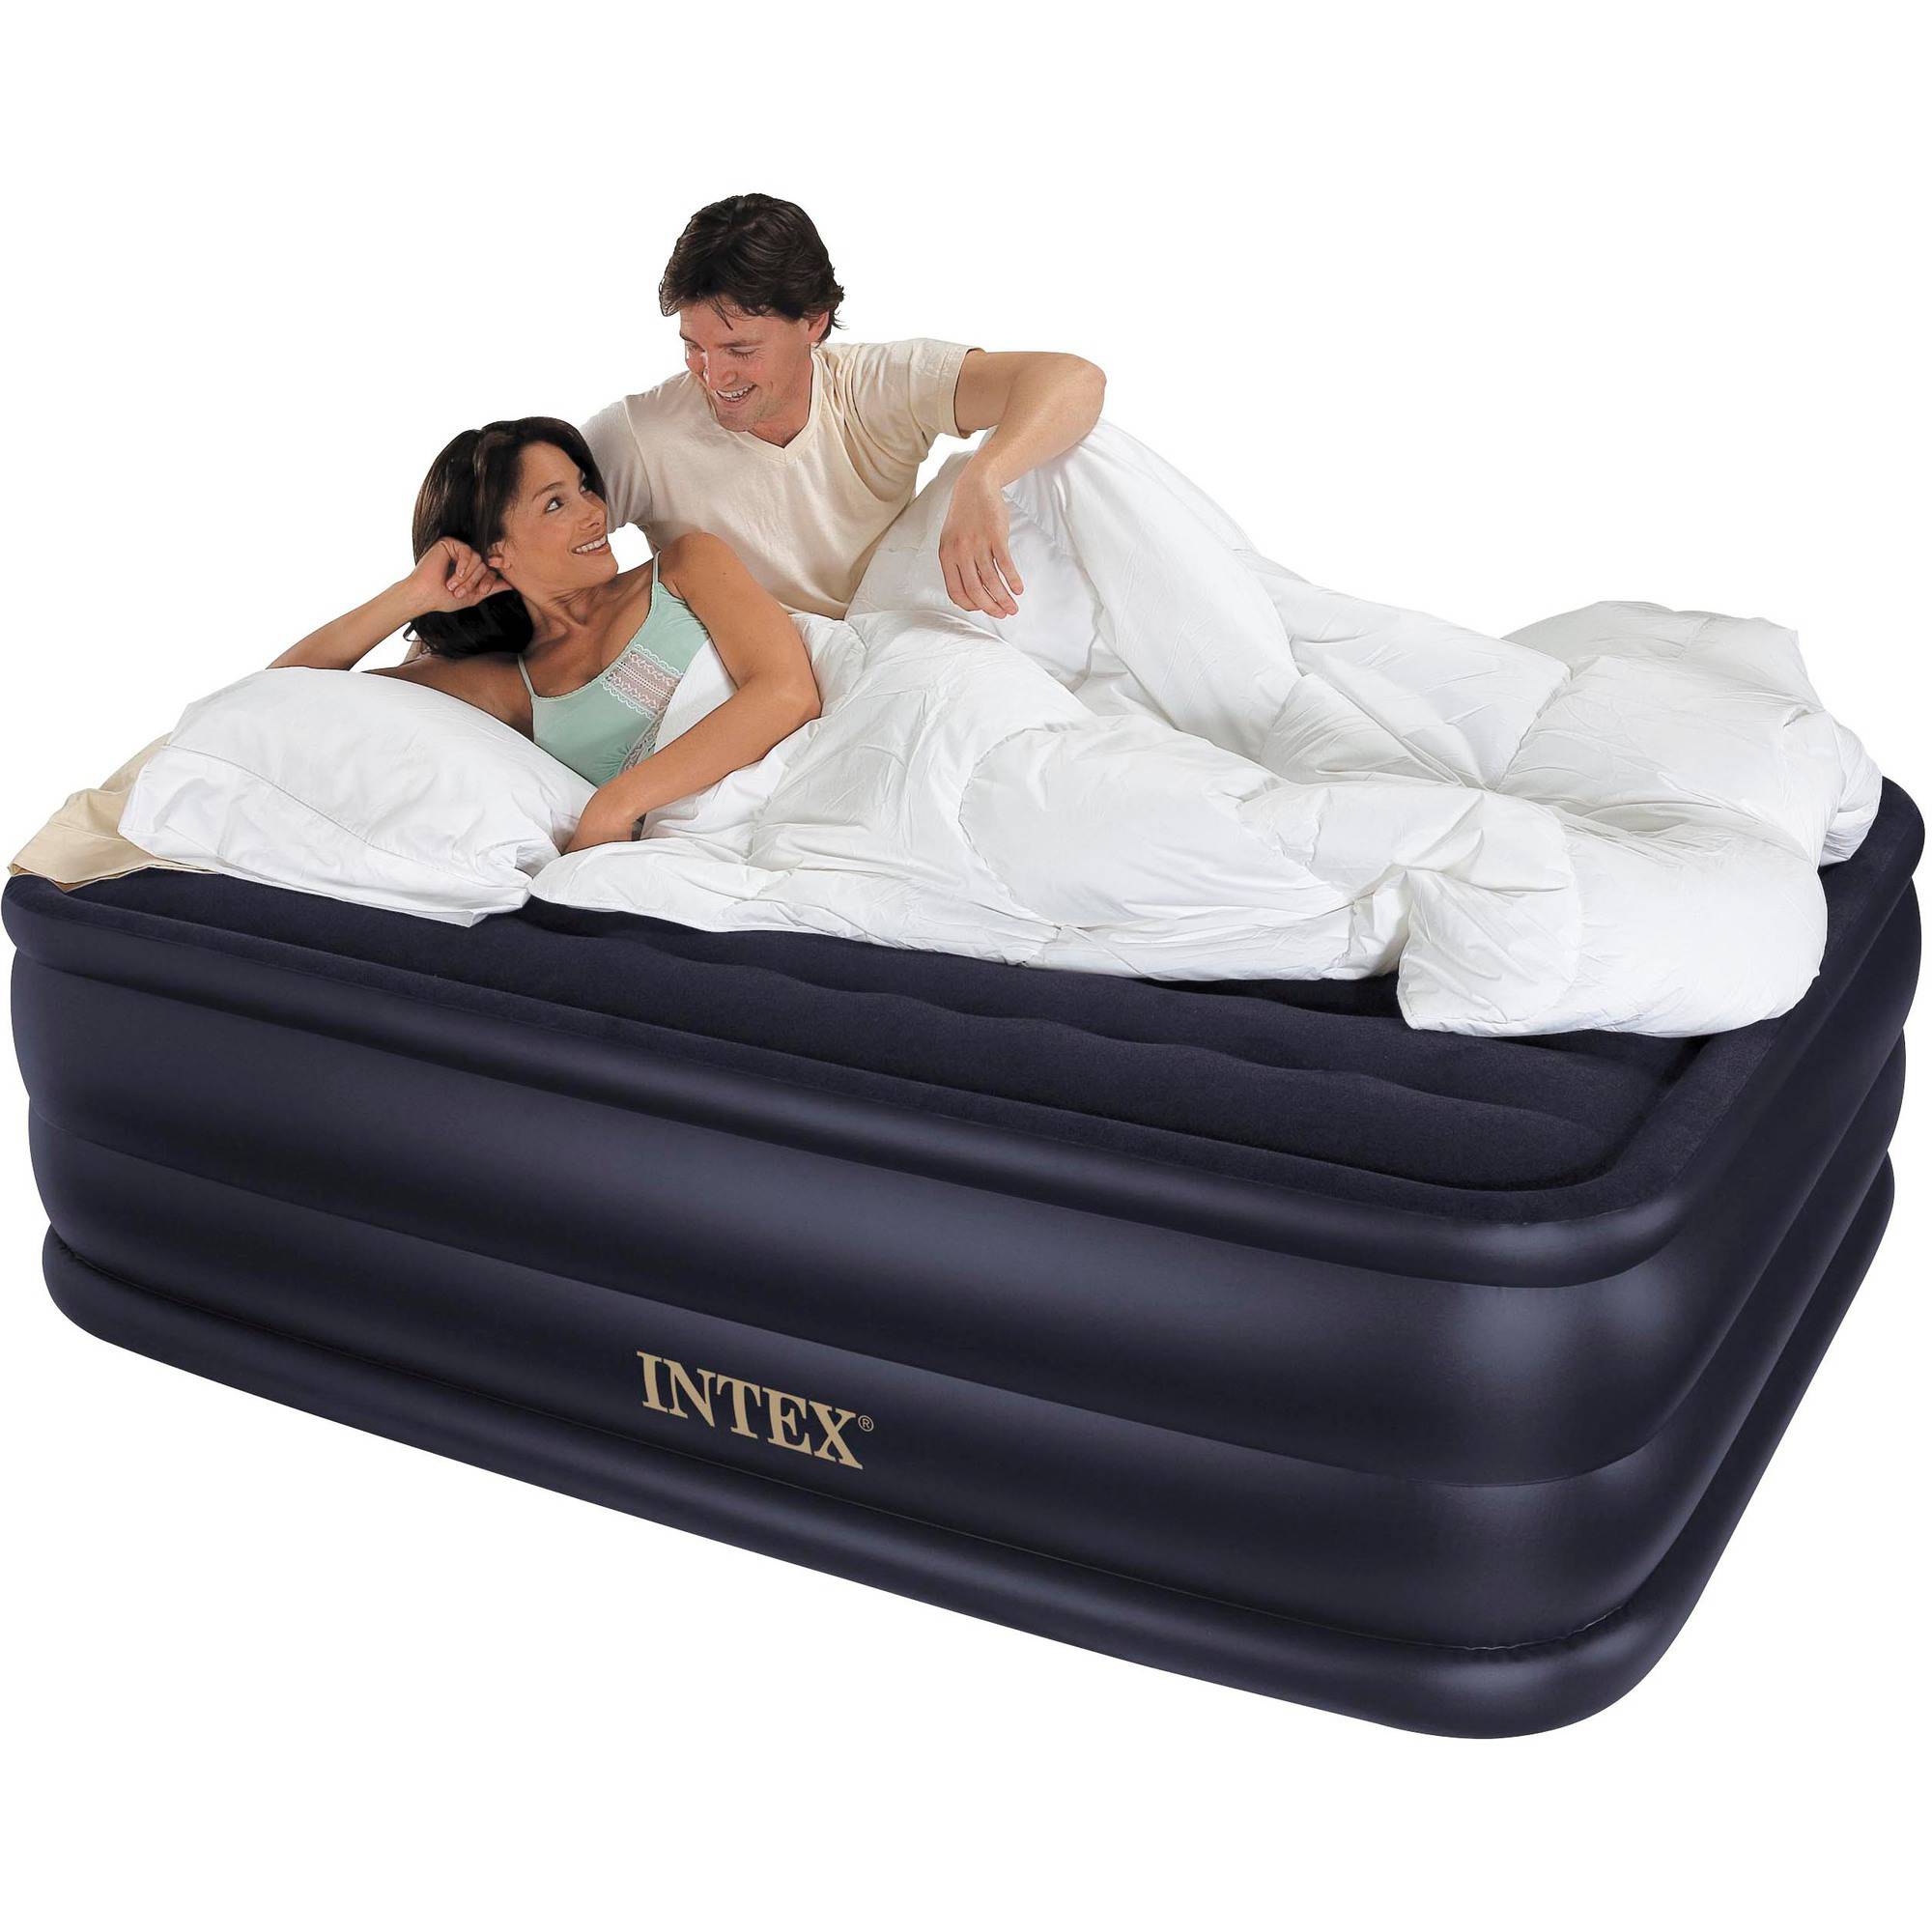 Intex Queen 22" Raised Downy Airbed Mattress with Built-in Electric Pump - image 1 of 8